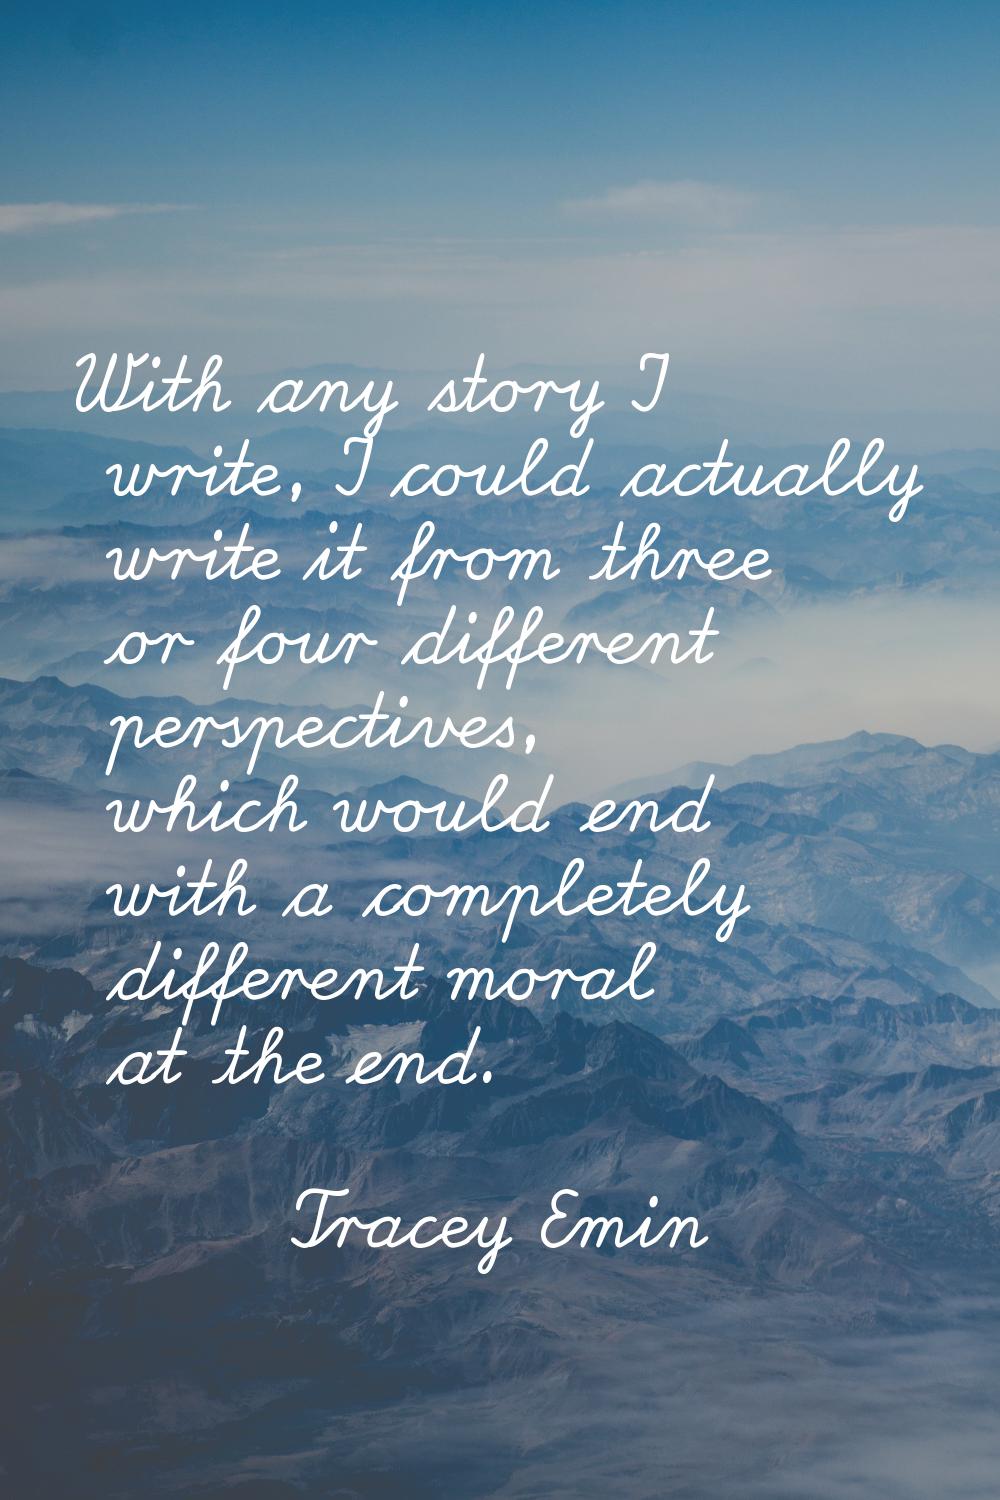 With any story I write, I could actually write it from three or four different perspectives, which 